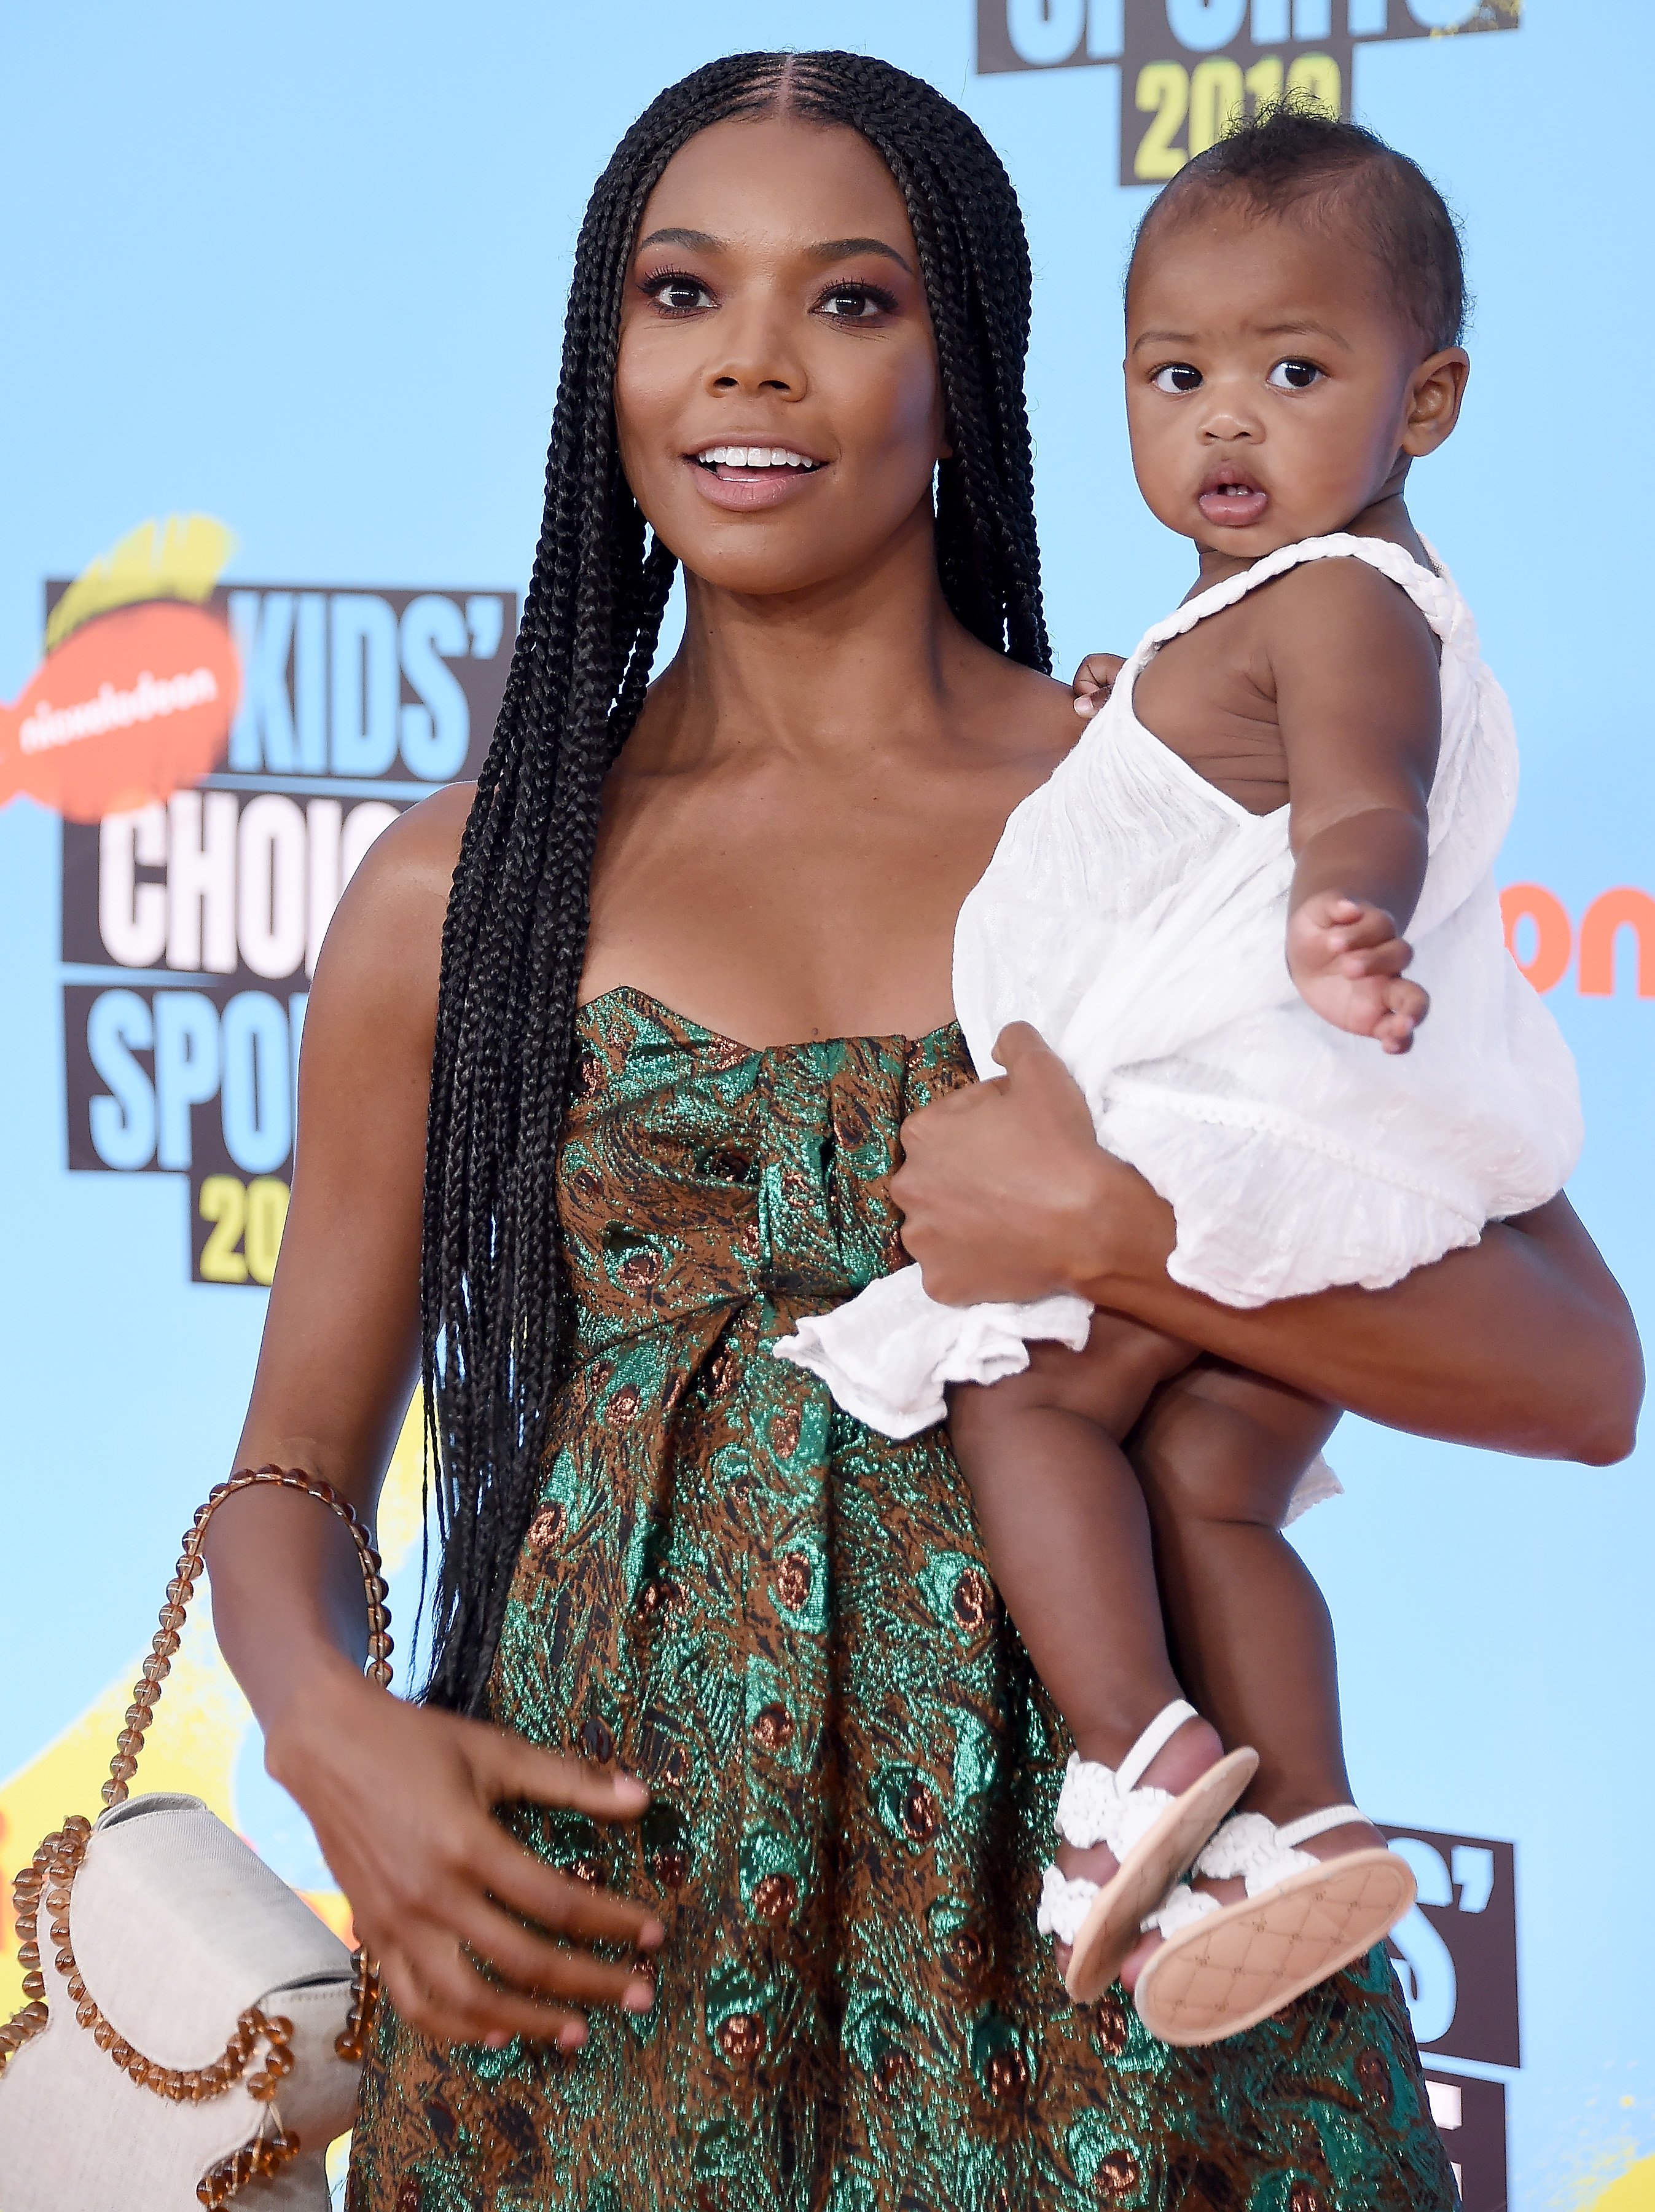  Gabrielle Union and Kaavia James Union Wade at the Nickelodeon Kids' Choice Sports Awards 2019 at Barker Hangar on July 11, 2019 in Santa Monica, California. | Source: Getty Images